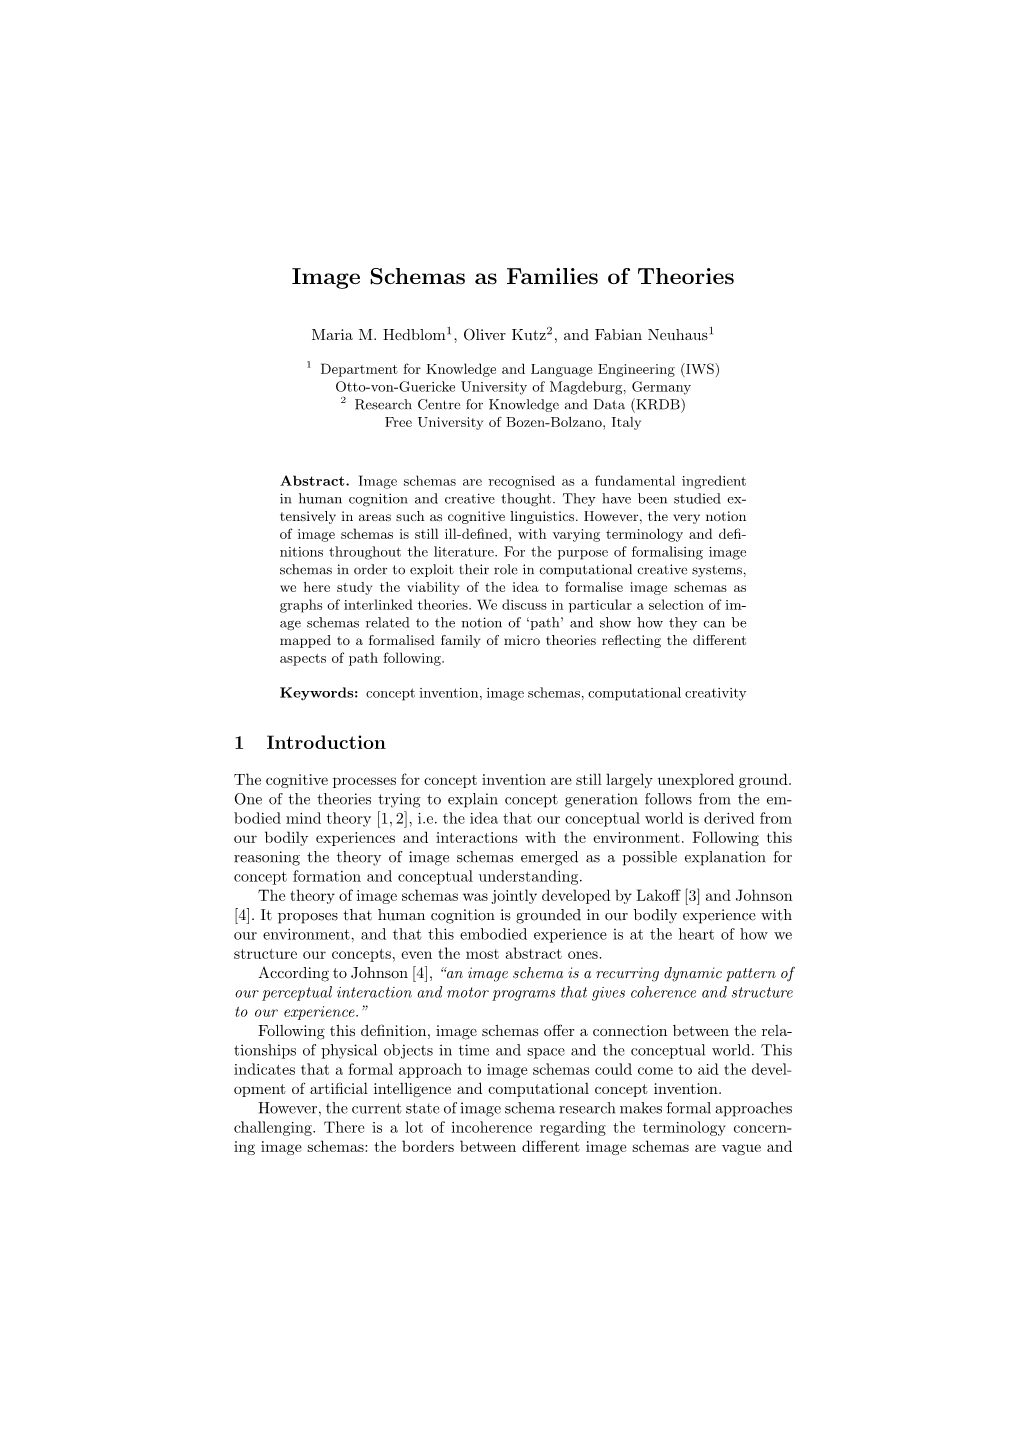 Image Schemas As Families of Theories